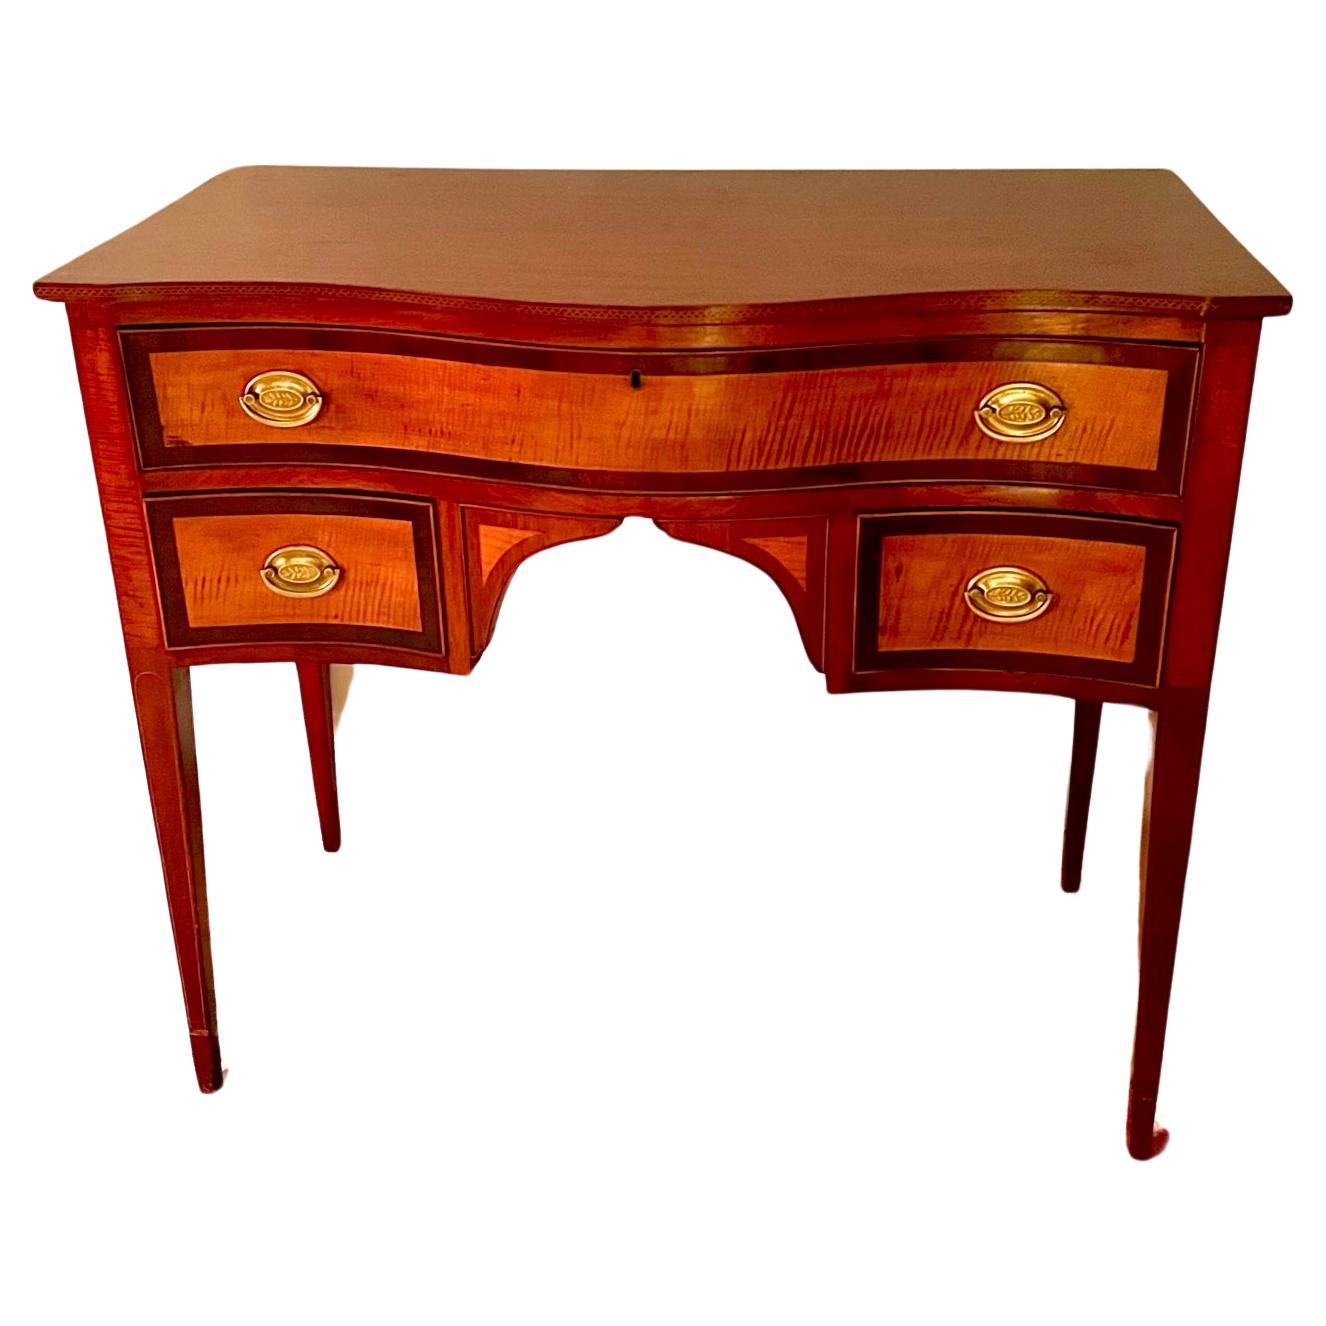 Hepplewhite Style Small Serpentine-Front Sideboard, New England, Circa:1890 For Sale